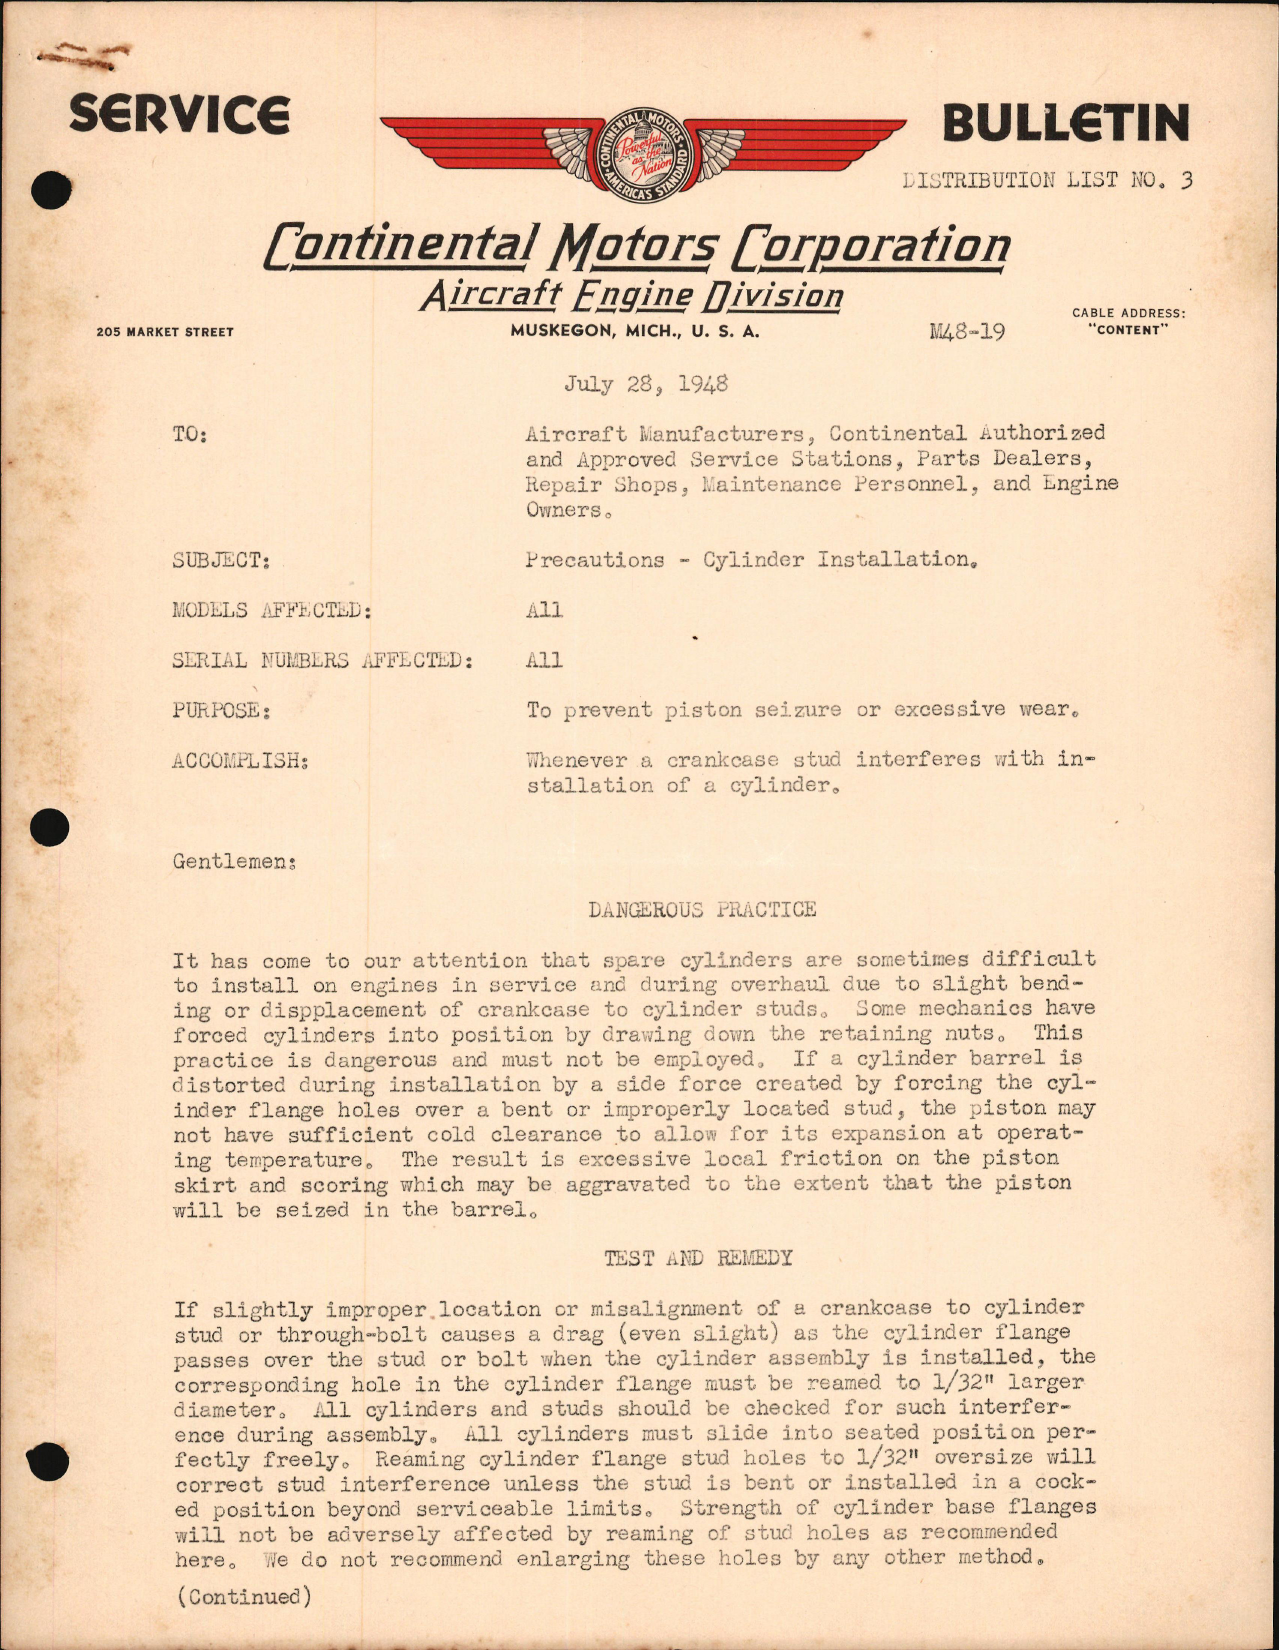 Sample page 1 from AirCorps Library document: Cylinder Installation Precautions